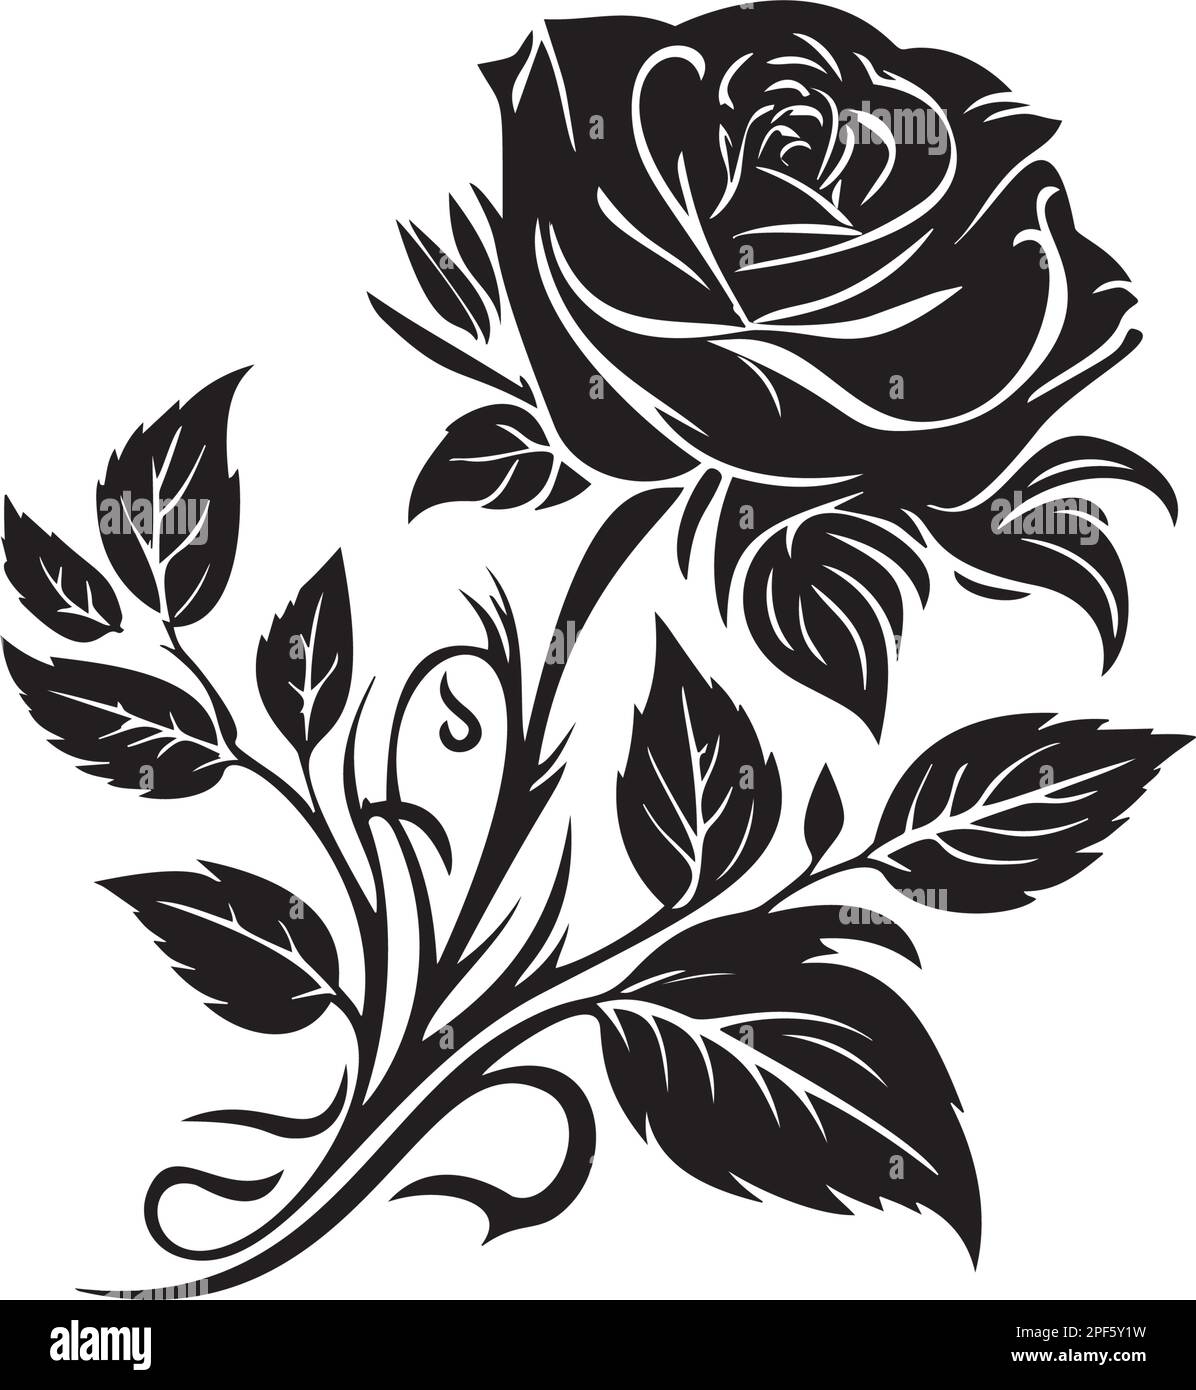 Rose silhouette vector logo in black color icon simple shapes ...